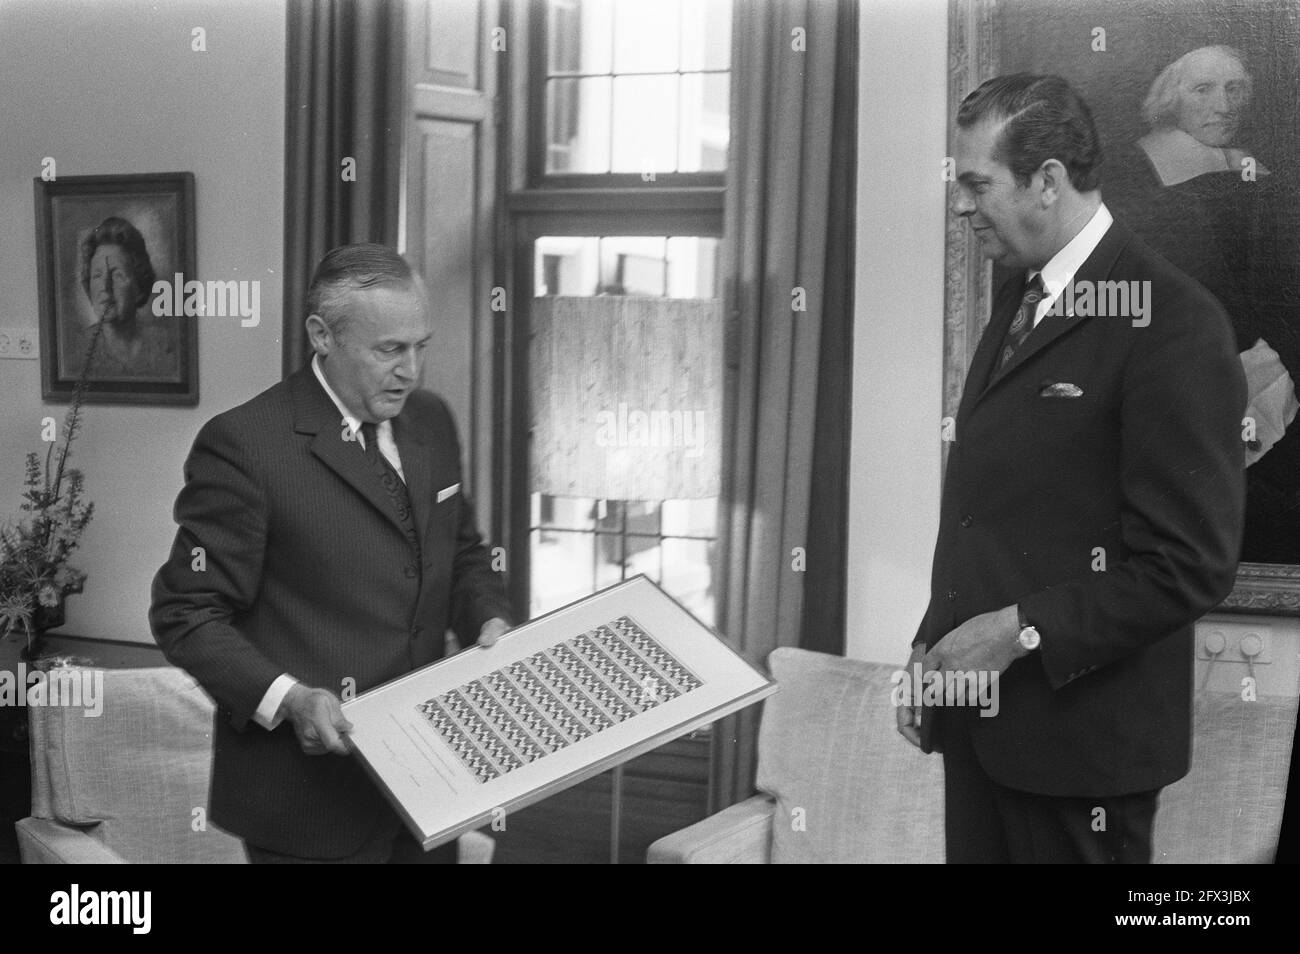 Prime Minister Barend Biesheuvel (r) receives the first postage stamps issued on the occasion of the 400th anniversary of the Dutch flag from the Director-General of the PTT, Drs. Ph. Leenman, July 4, 1972, directors, commemorations, prime ministers, stamps, The Netherlands, 20th century press agency photo, news to remember, documentary, historic photography 1945-1990, visual stories, human history of the Twentieth Century, capturing moments in time Stock Photo